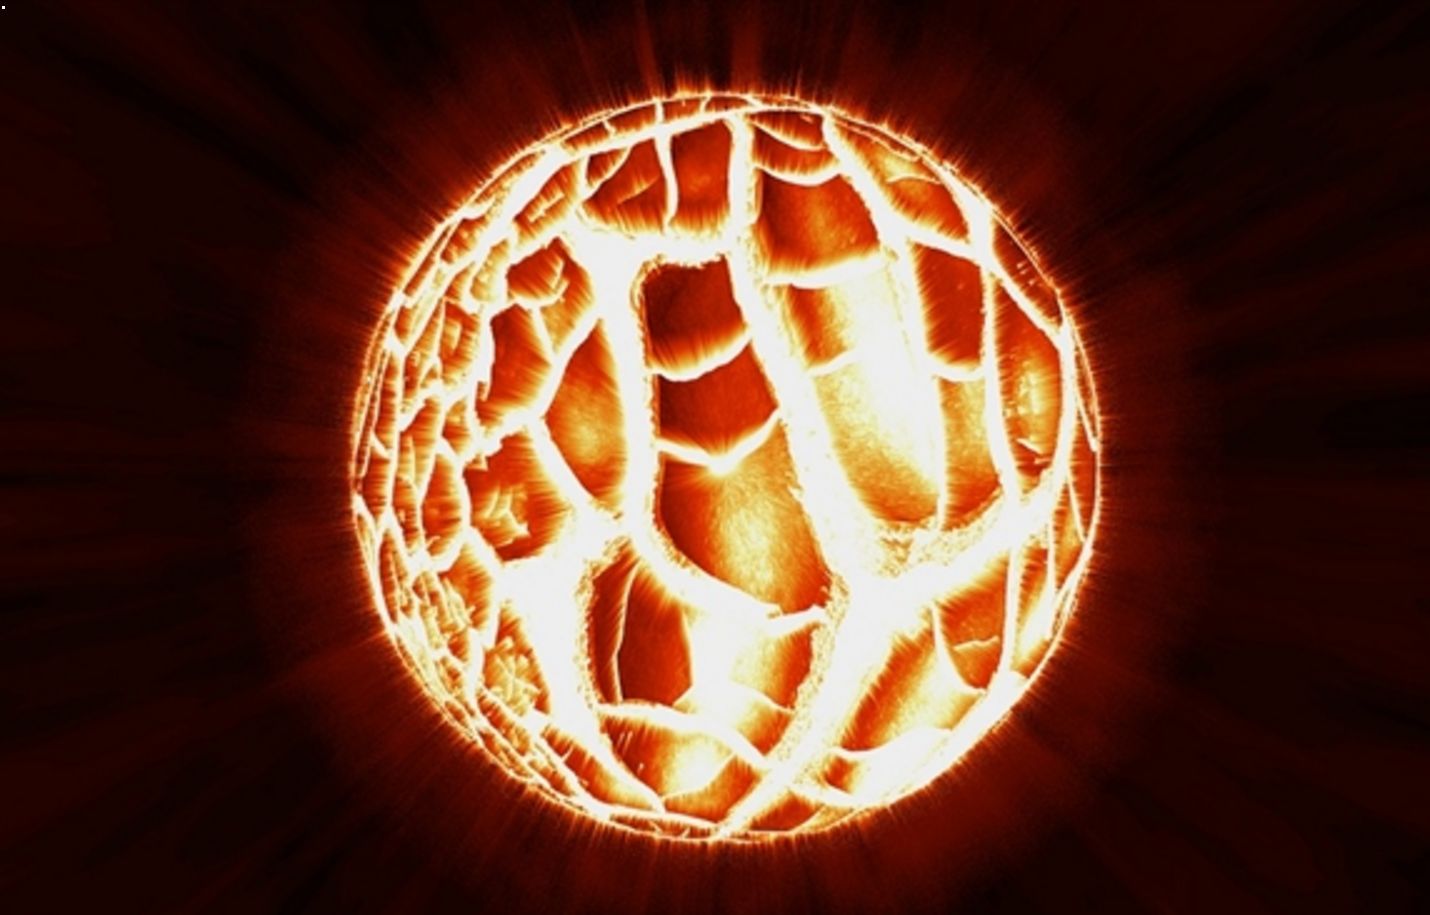 The clearest photo of the sun